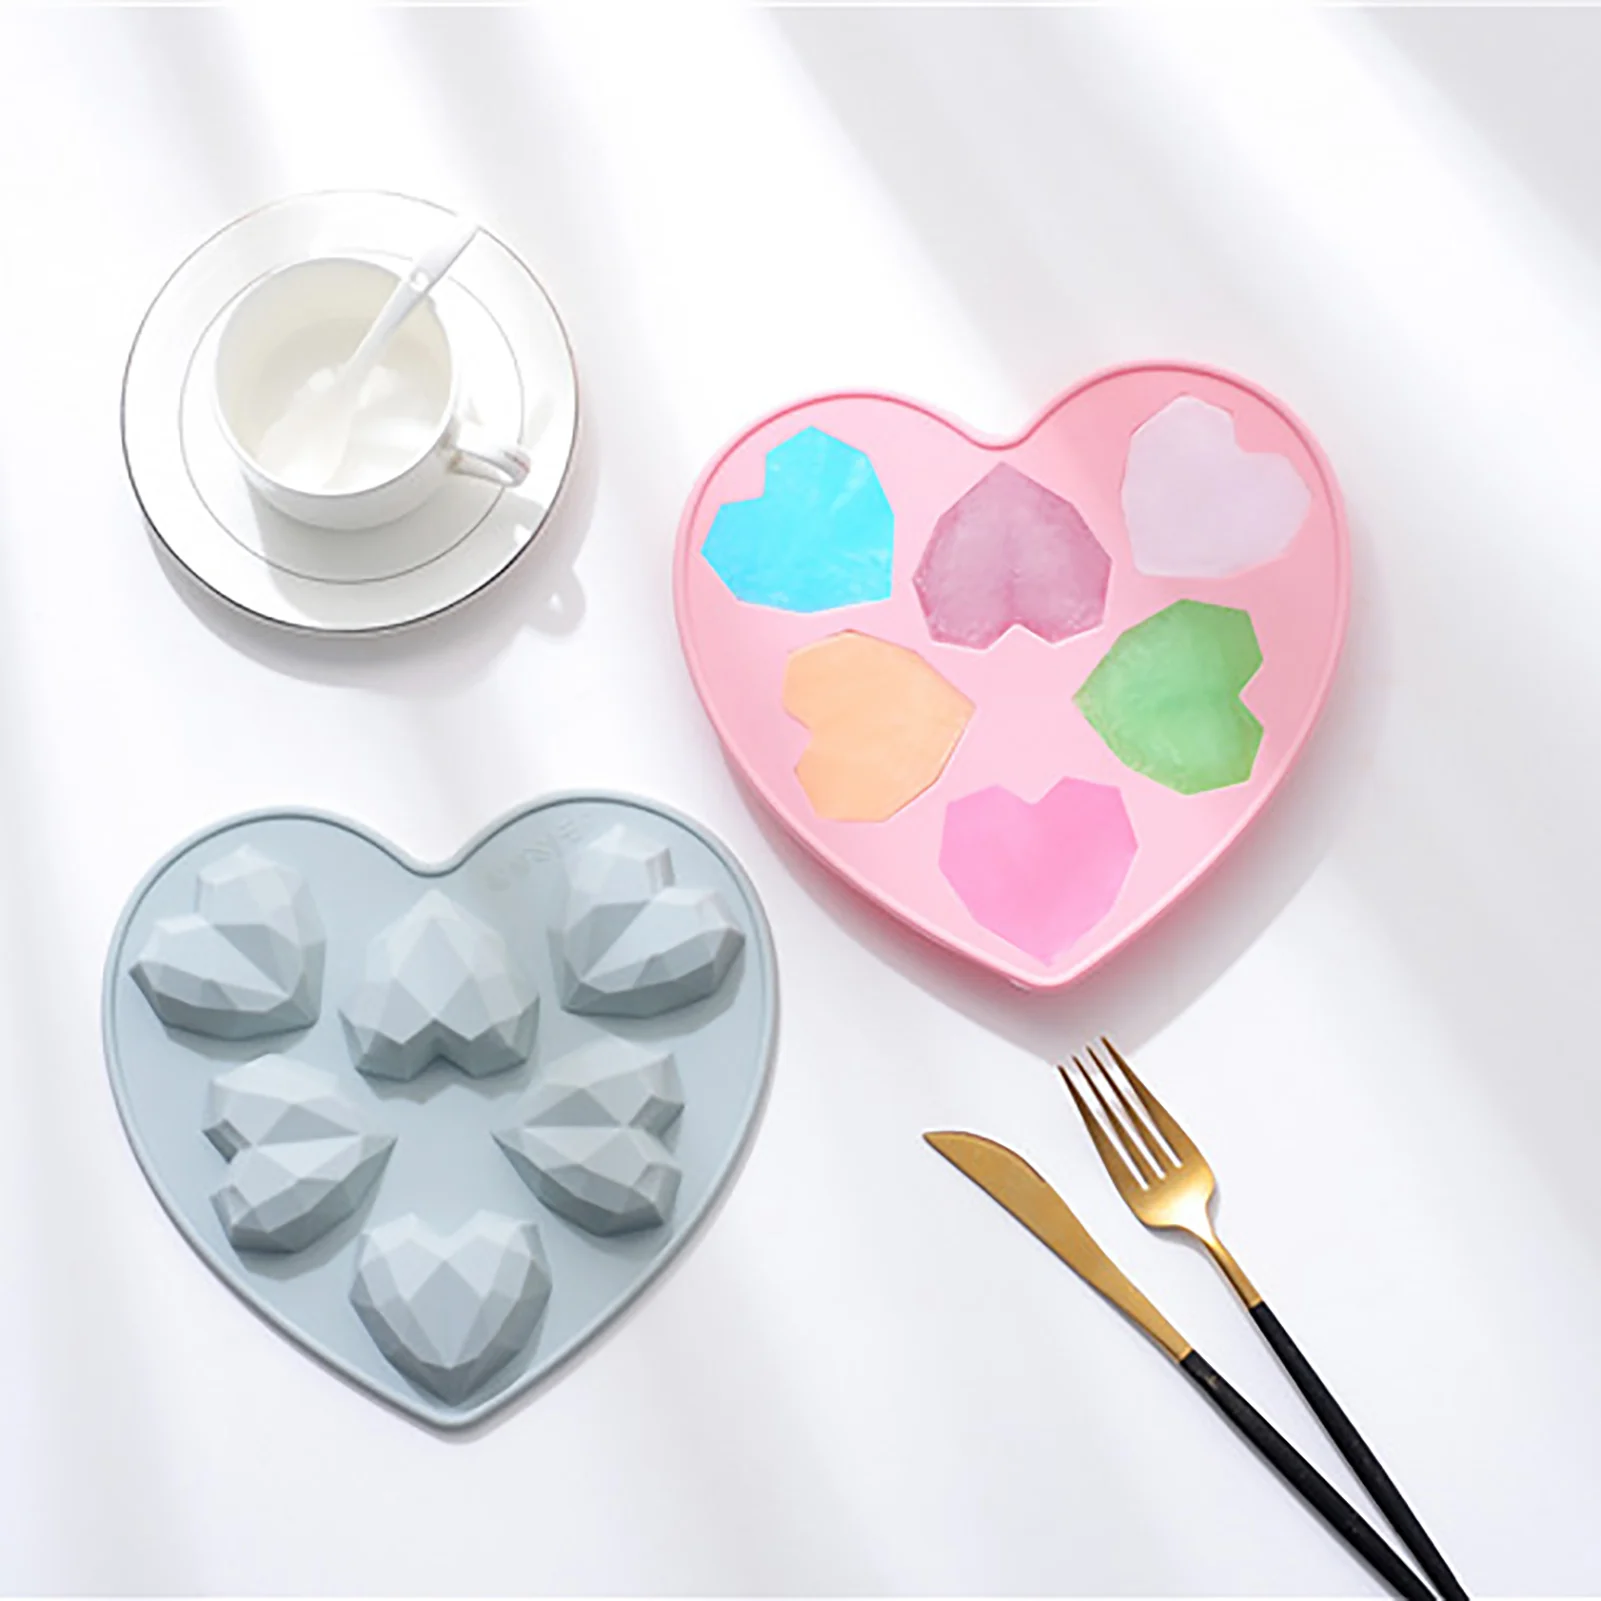 

Silicone Love Cake Moulds 6 Cavity Diamond Love Heart Fondant Decorating Tools 3D DIY Chocolate Pastry Molds Baking Accessories